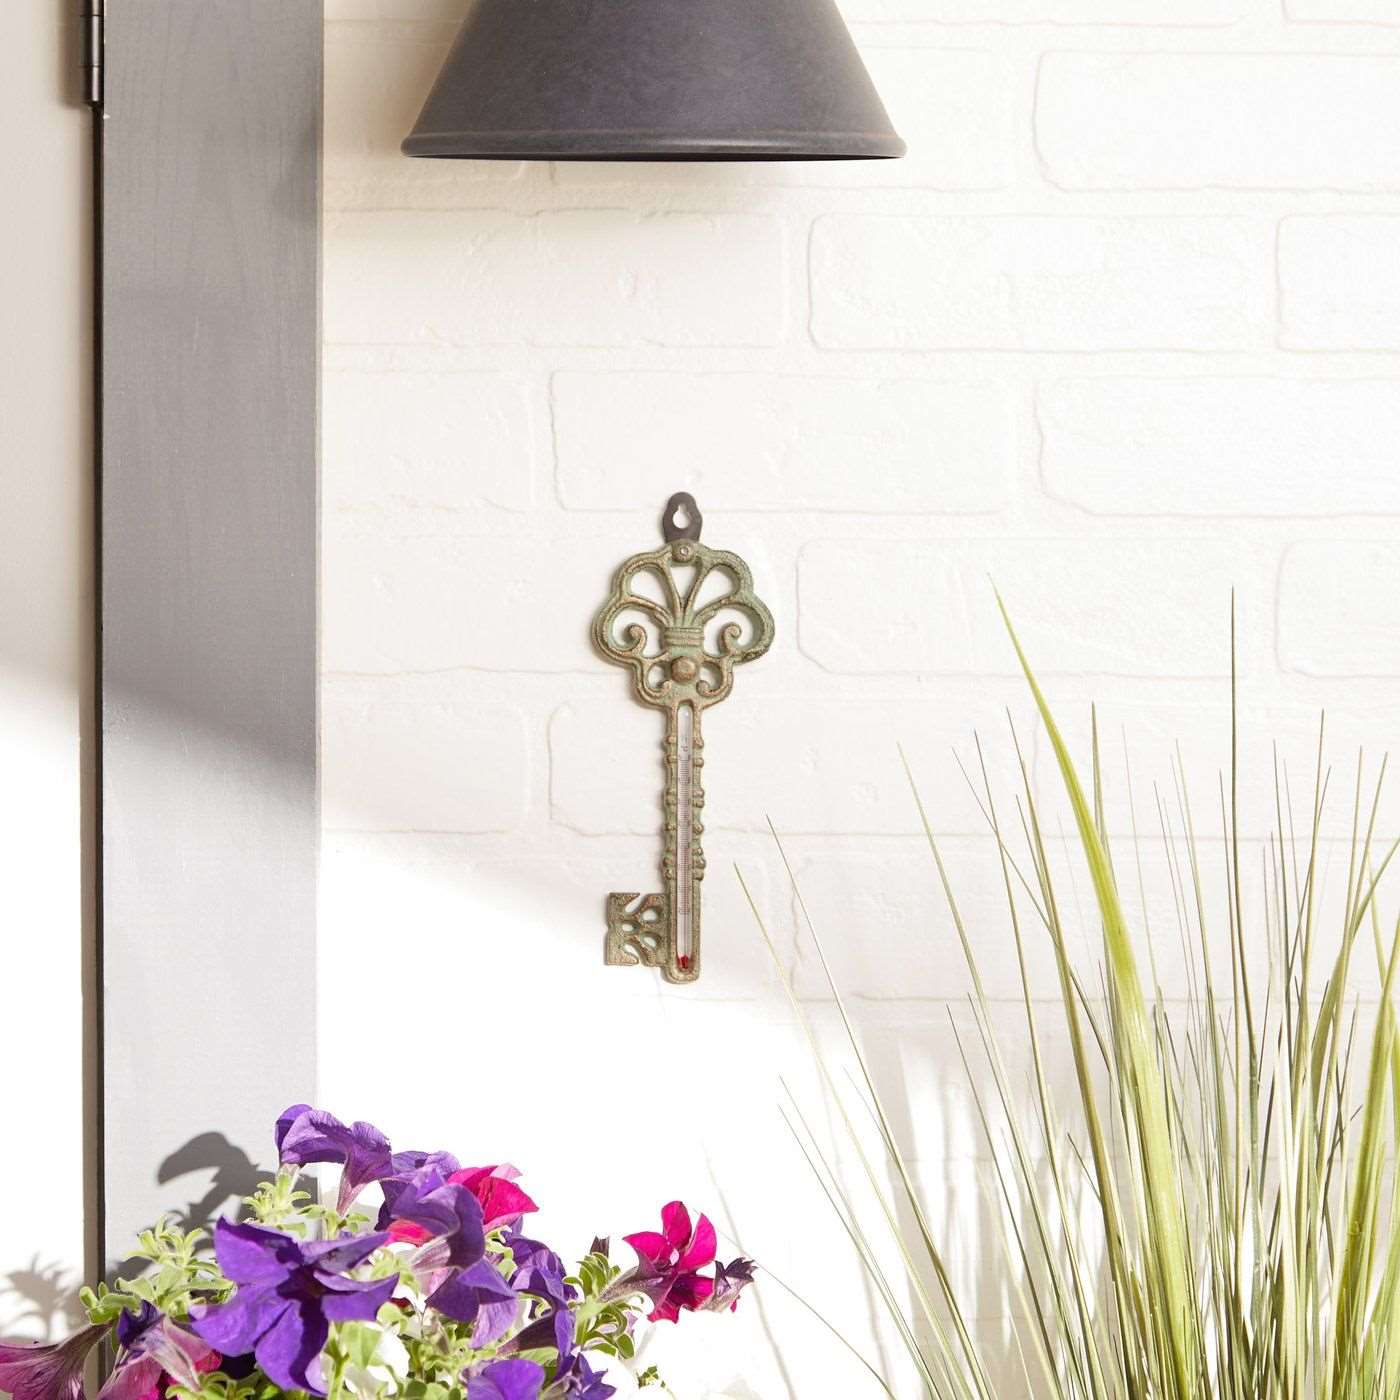 This easy to hang iron décor is beautiful and functional. Keep track of temps while enjoying the ornate beauty of the design. Hang this durable cast iron thermometer on your porch, deck, fence, garden shed, garage or even a tree to add a bit of functional décor to your garden or yard space.